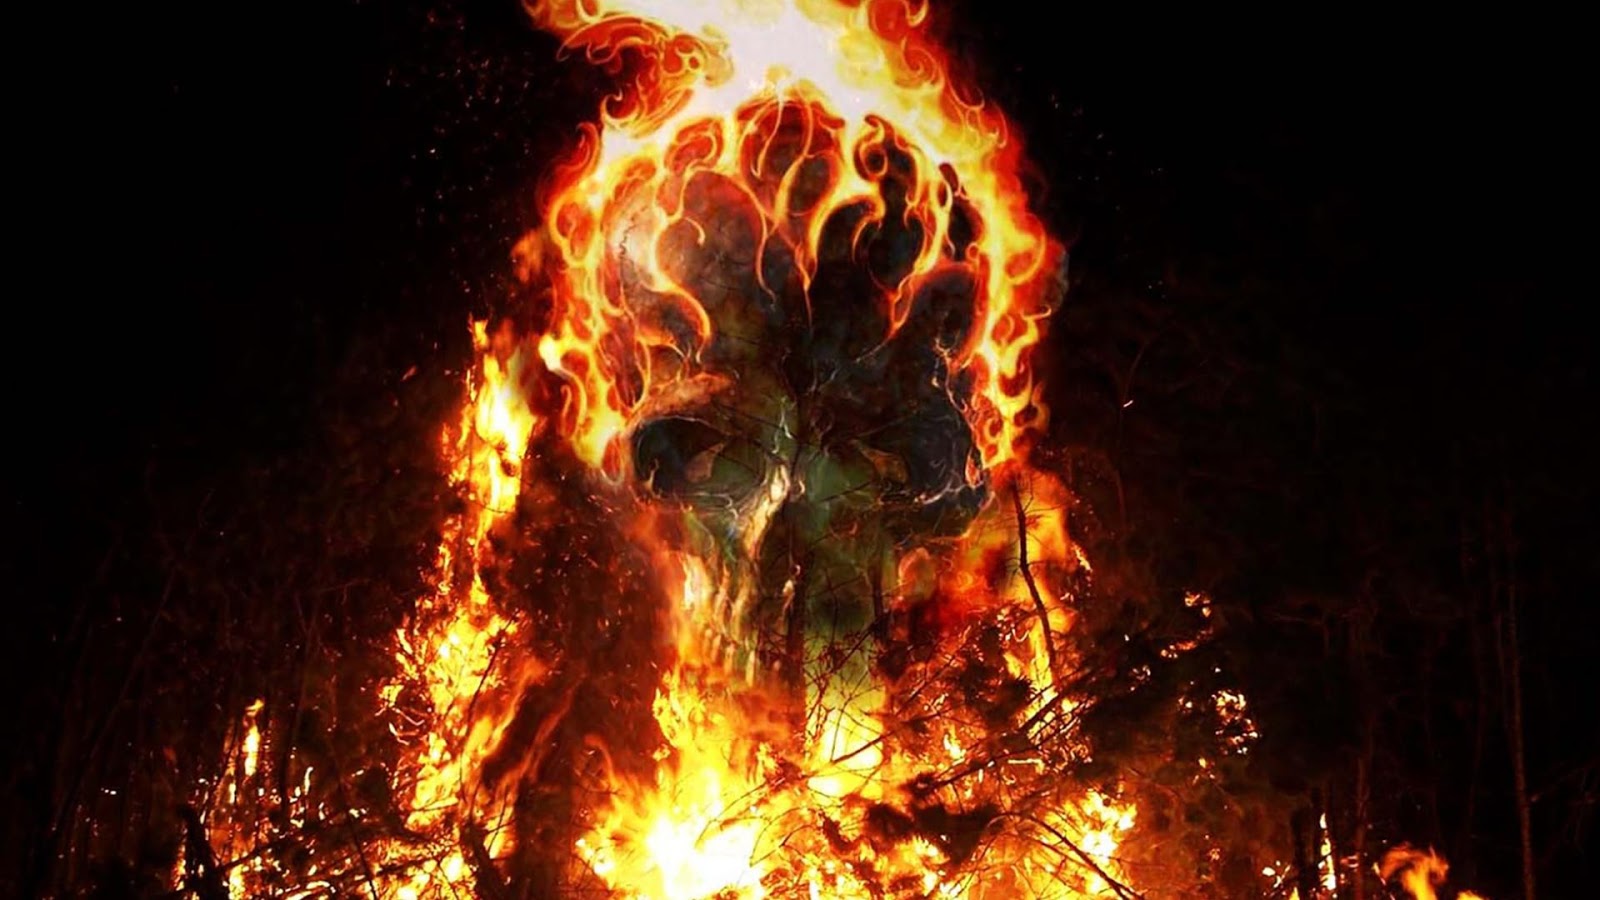 Fire Skulls Live Wallpaper That Brings The Scariest Background